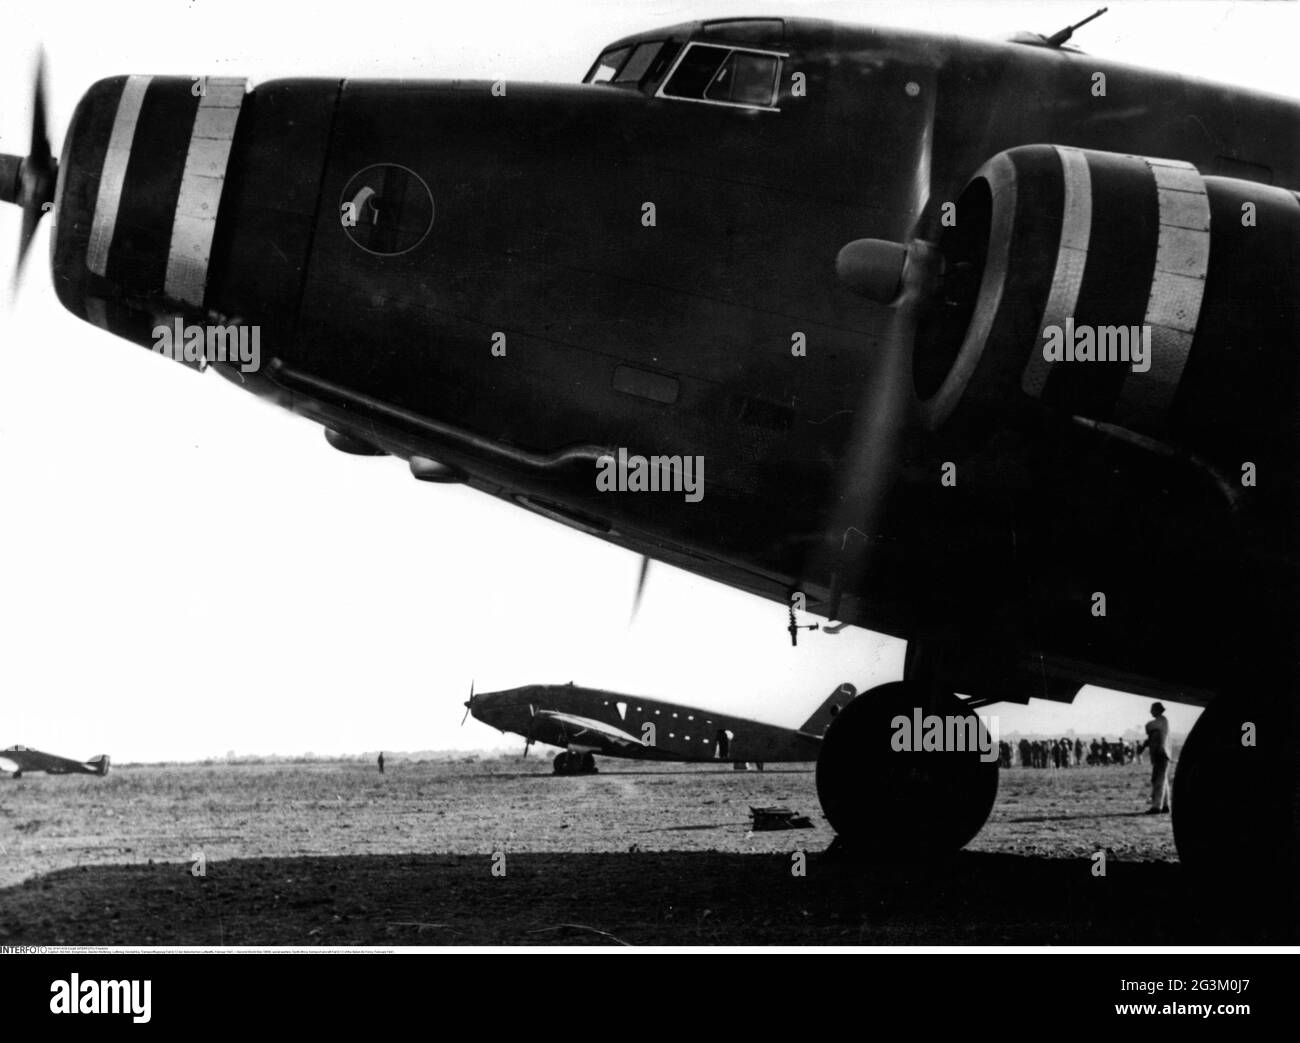 Second World War / WWII, aerial warfare, North Africa, transport aircraft Fiat G.12 of the Italian Air Force, February 1941, EDITORIAL-USE-ONLY Stock Photo